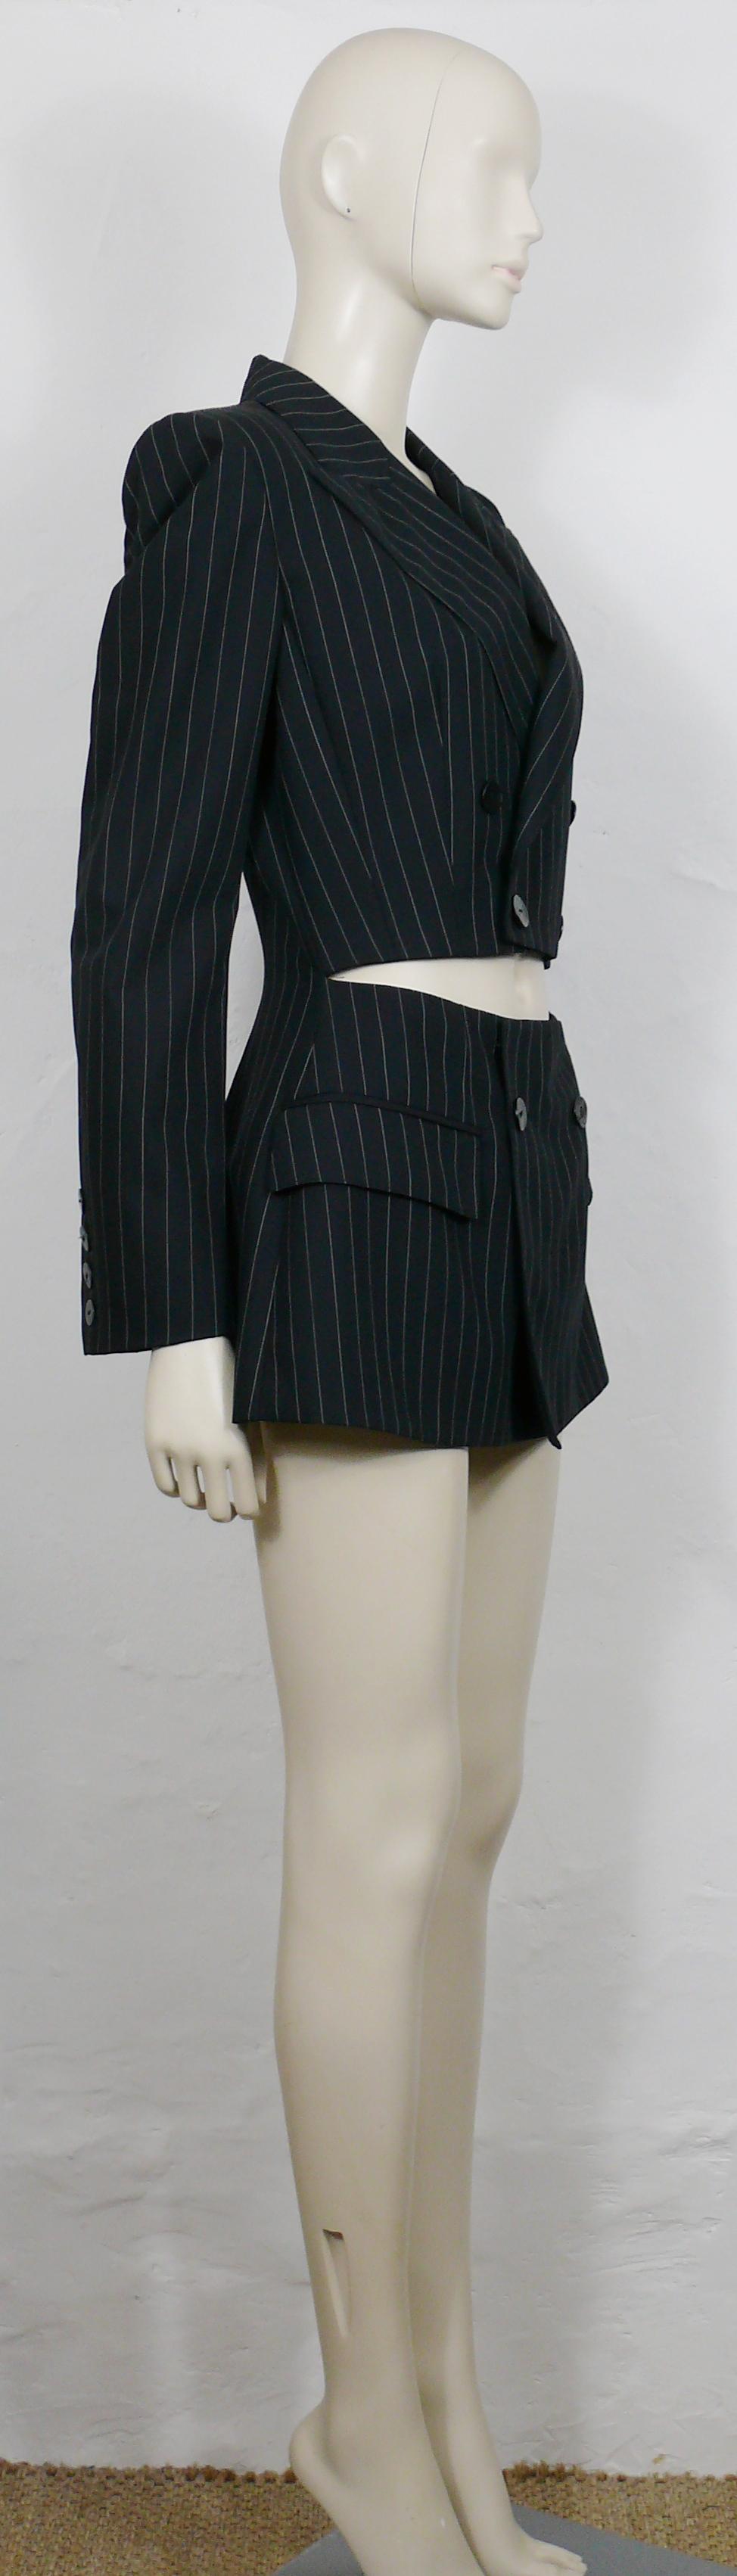 JEAN PAUL GAULTIER vintage black pinstripe cut-out waist double breasted blazer jacket.

This blazer features :
- Black virgin wool fabric with white pinstripes.
- Classic lapel collar.
- Cut-out waist.
- Double breasted.
- Two faux pockets.
-